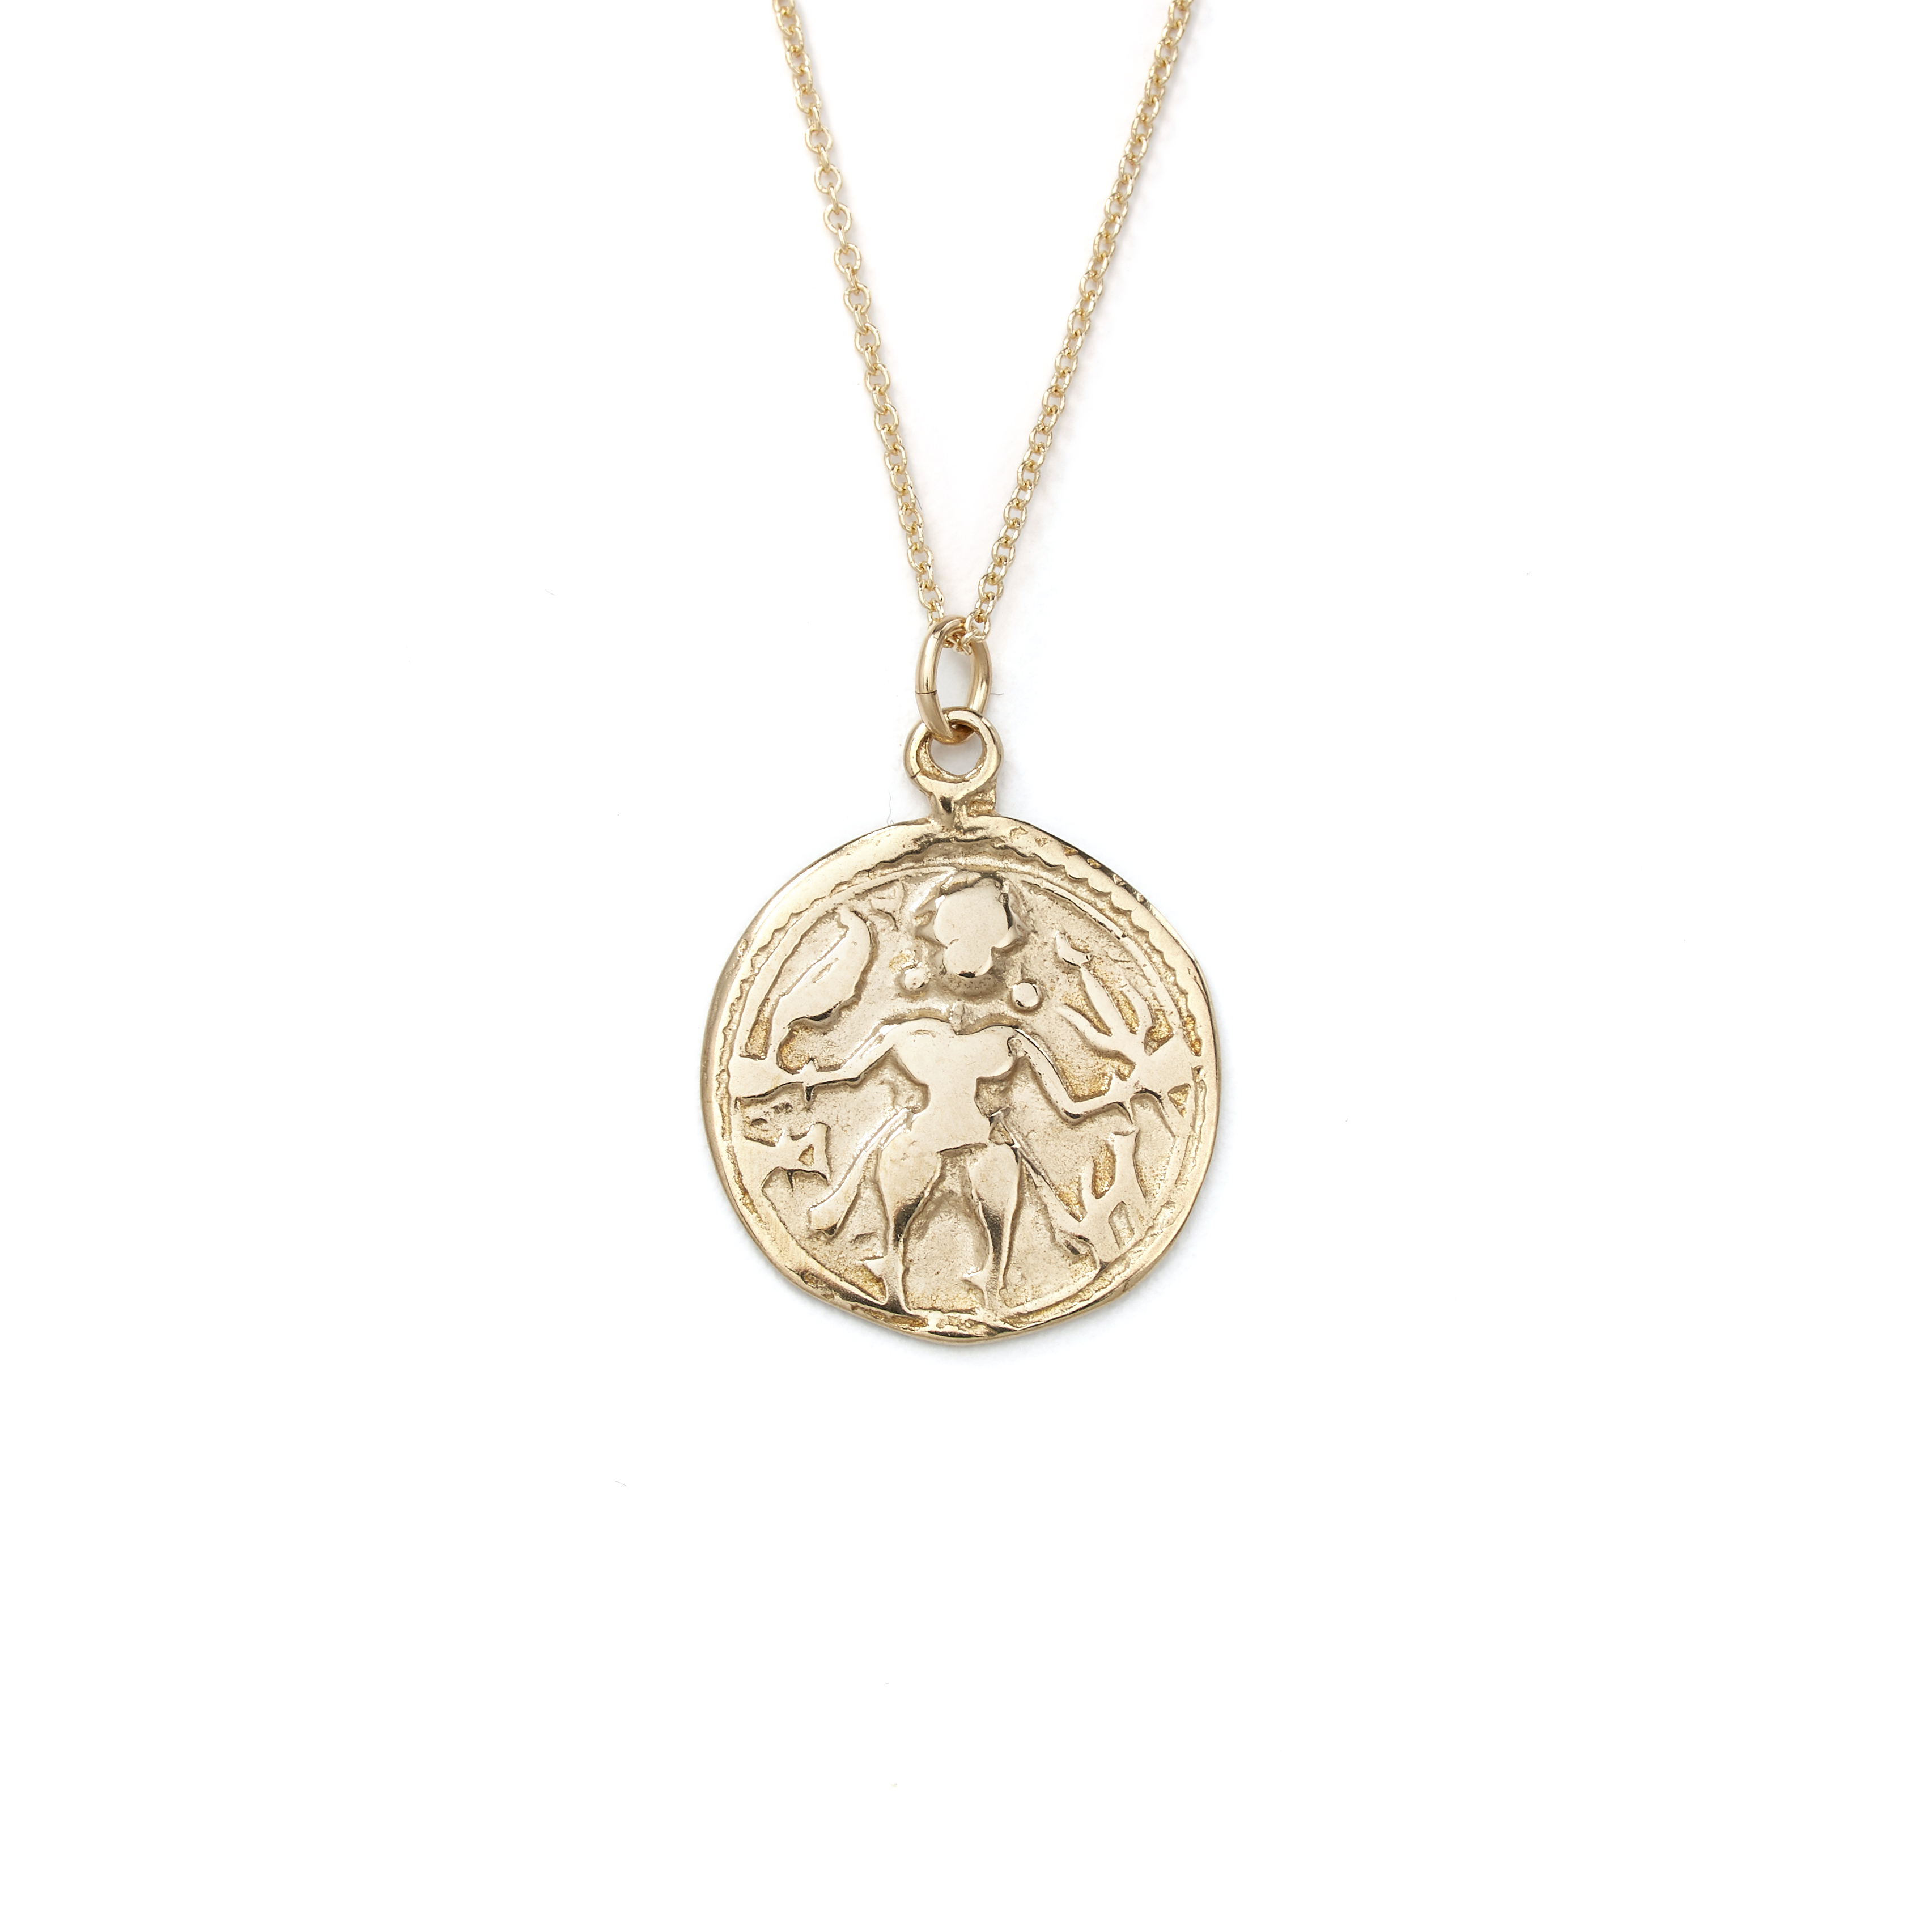 Carved Gold Coin Pendant Necklace for Women Girls Men 925 Sterling Silver  18K Gold Plated Simple Round Chain Goddess Worship Celebrity Medal  Reversible Keepsake Chic Choker Fashion Jewelry Gifts Box : Amazon.in: